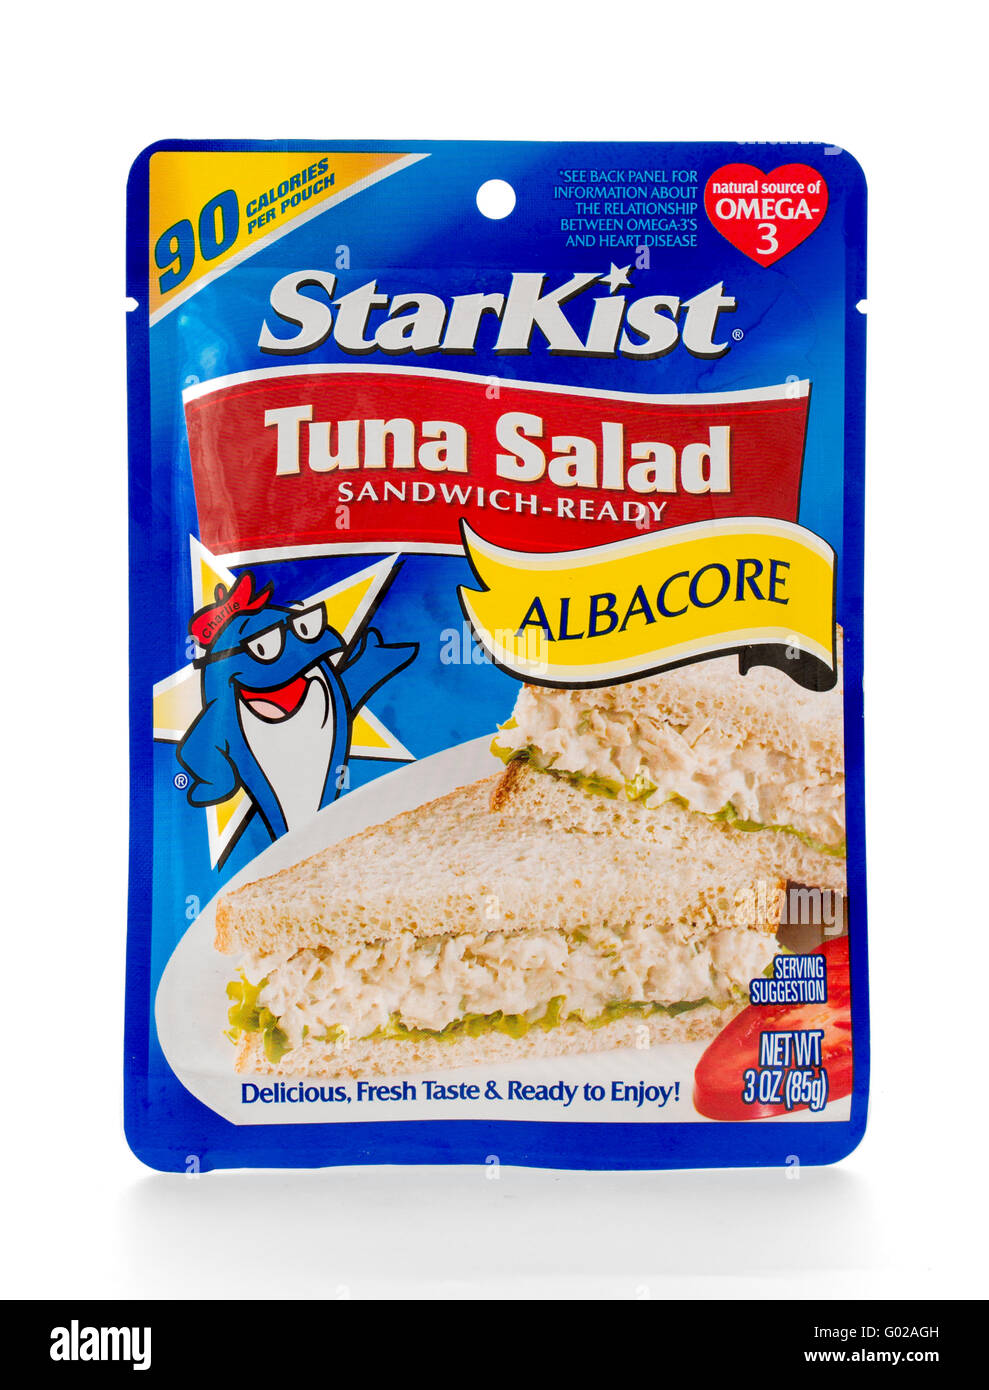 Winneconne, WI - 7 February 2015: Pouch of Albacore Tuna Salad made by Starkist. Stock Photo